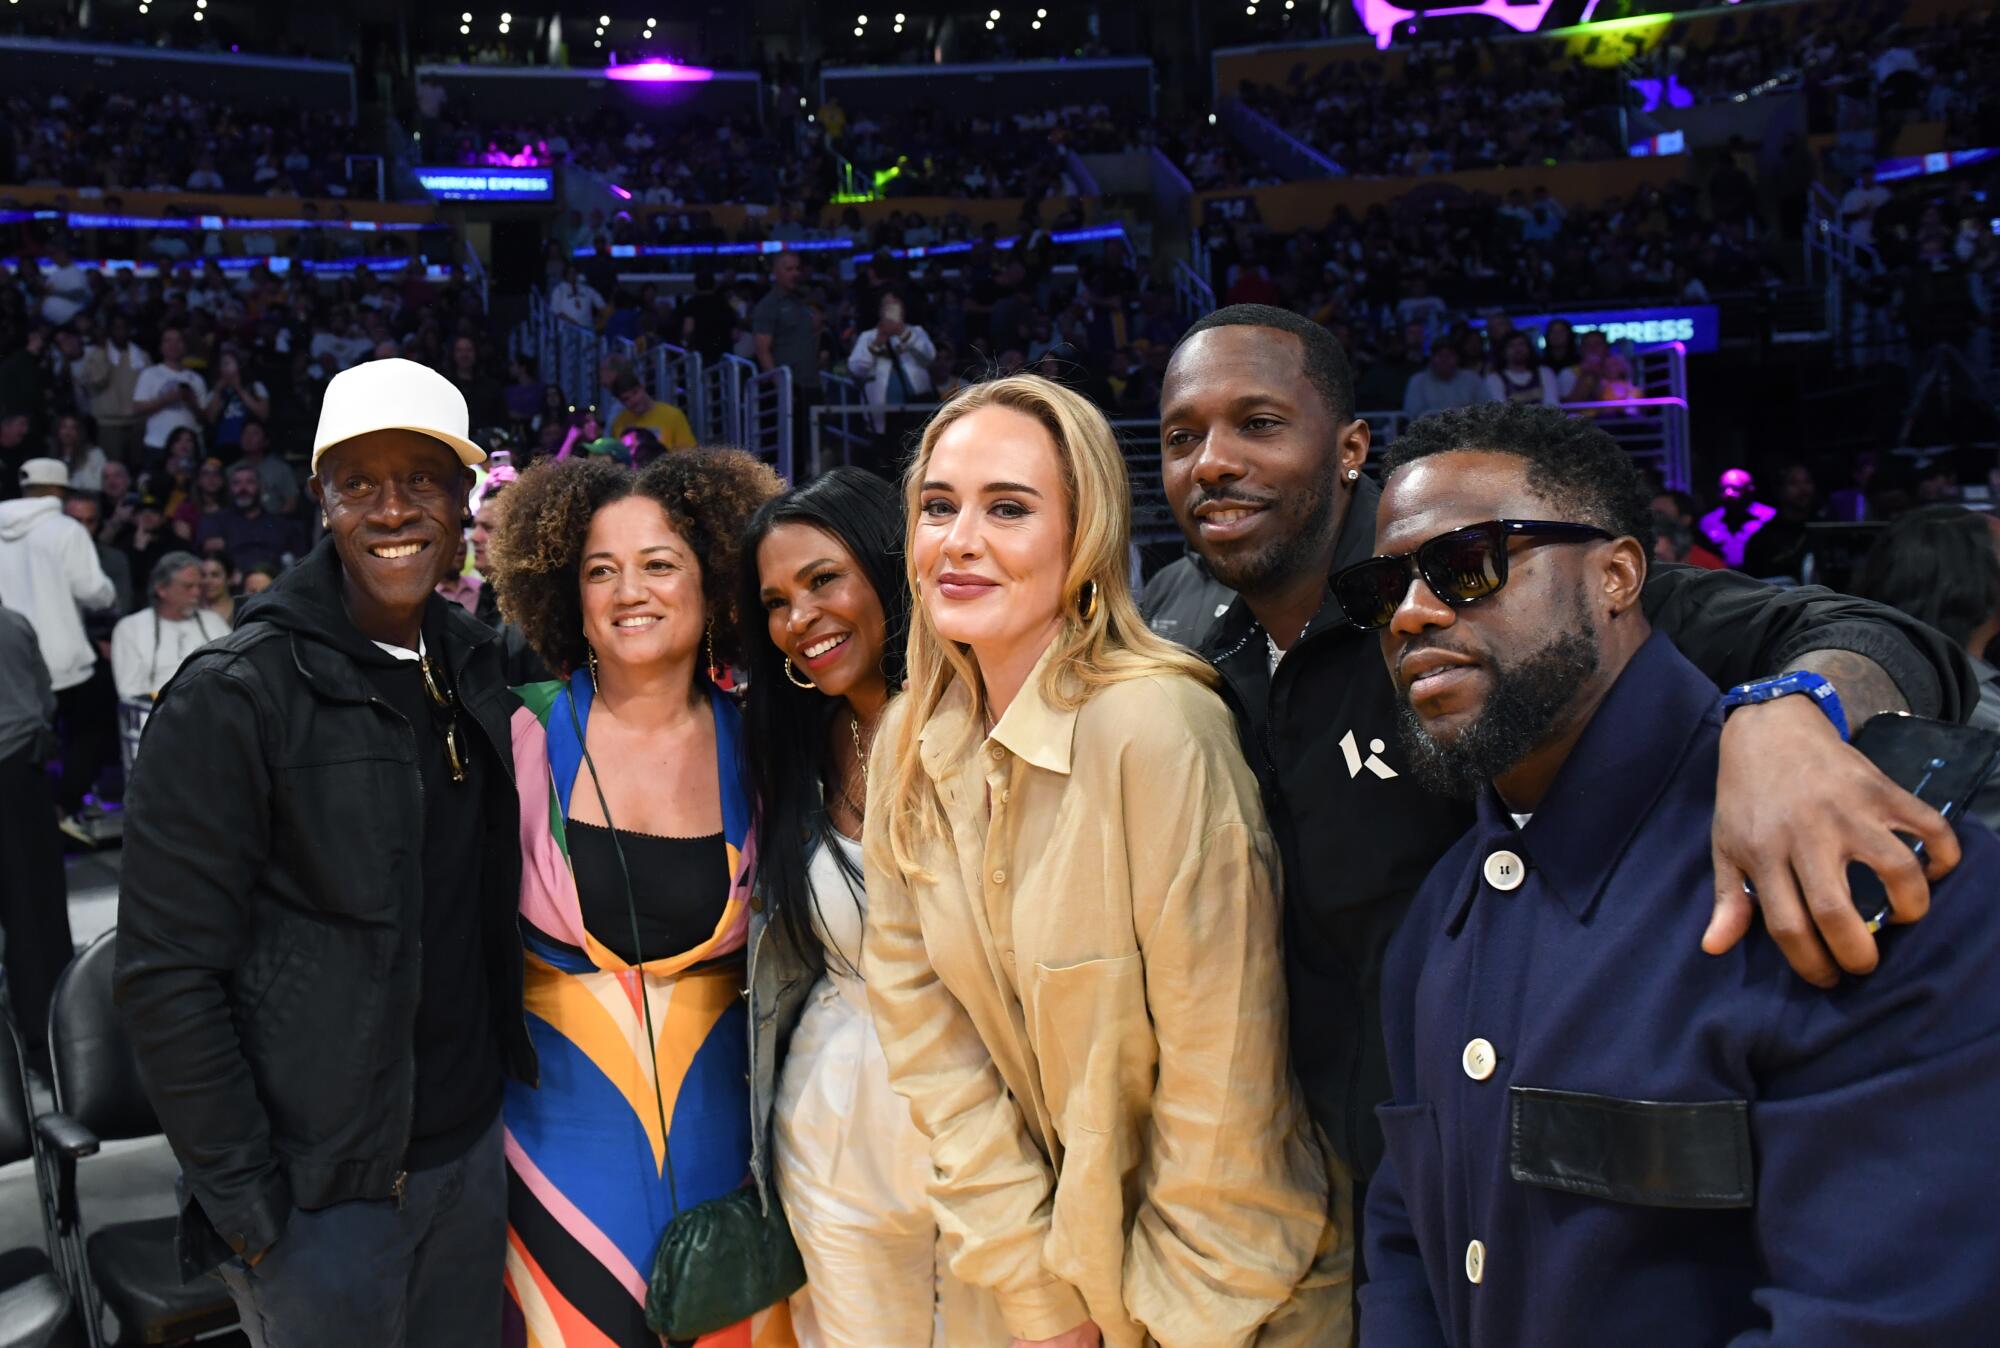 Don Cheadle, from left, stands on the sidelines with his wife and other celebrities during Game 3.